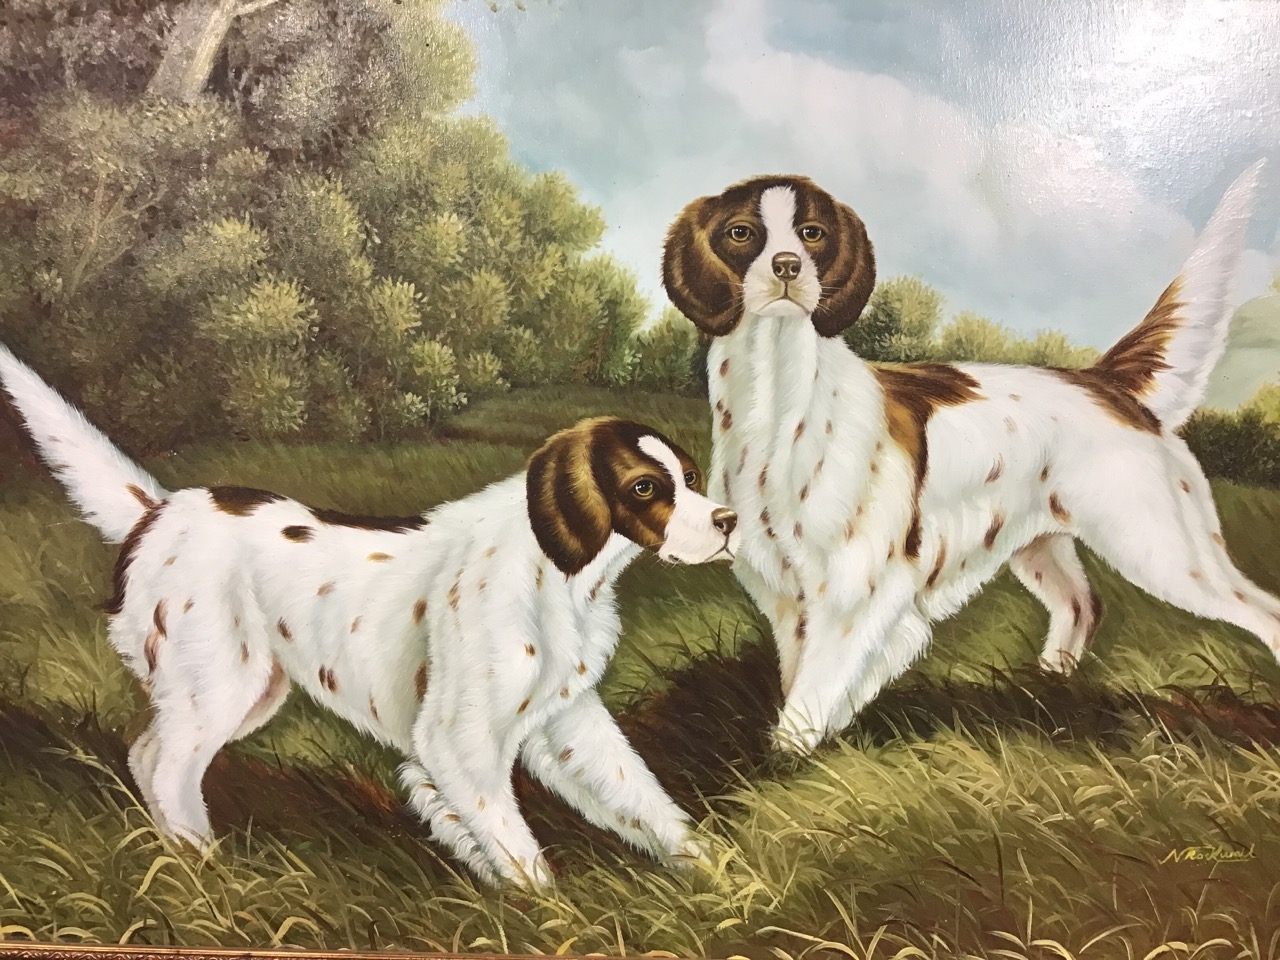 N Rockwell, oil on canvas a pair of spaniels in a grassy field by trees, in moulded gilt frame. (